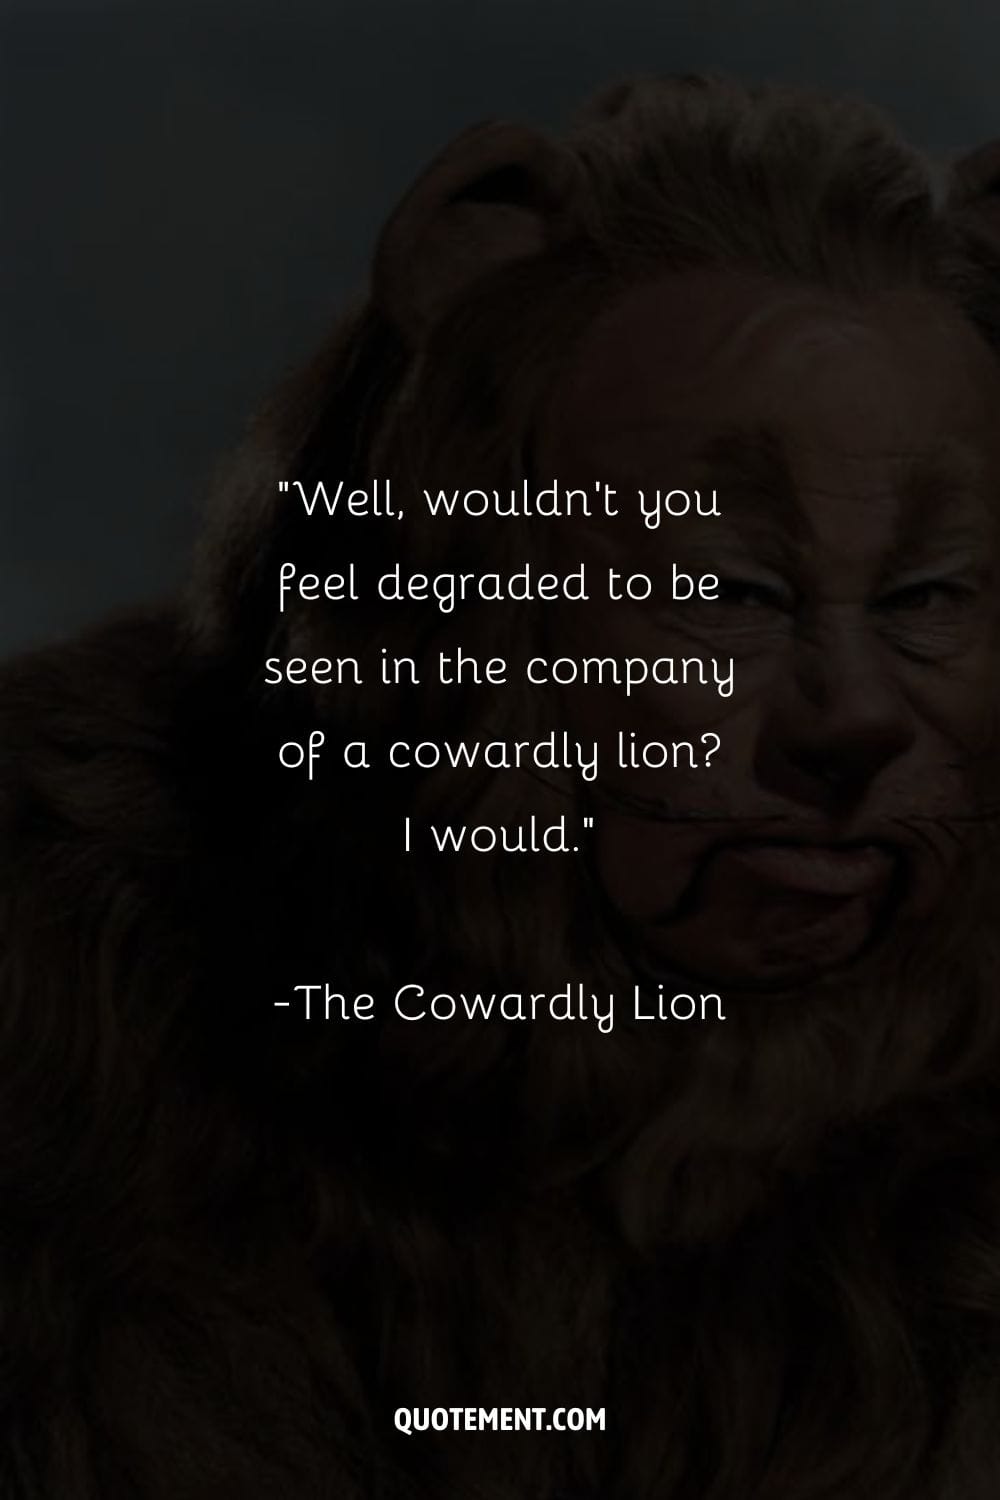 the lovable Cowardly Lion
